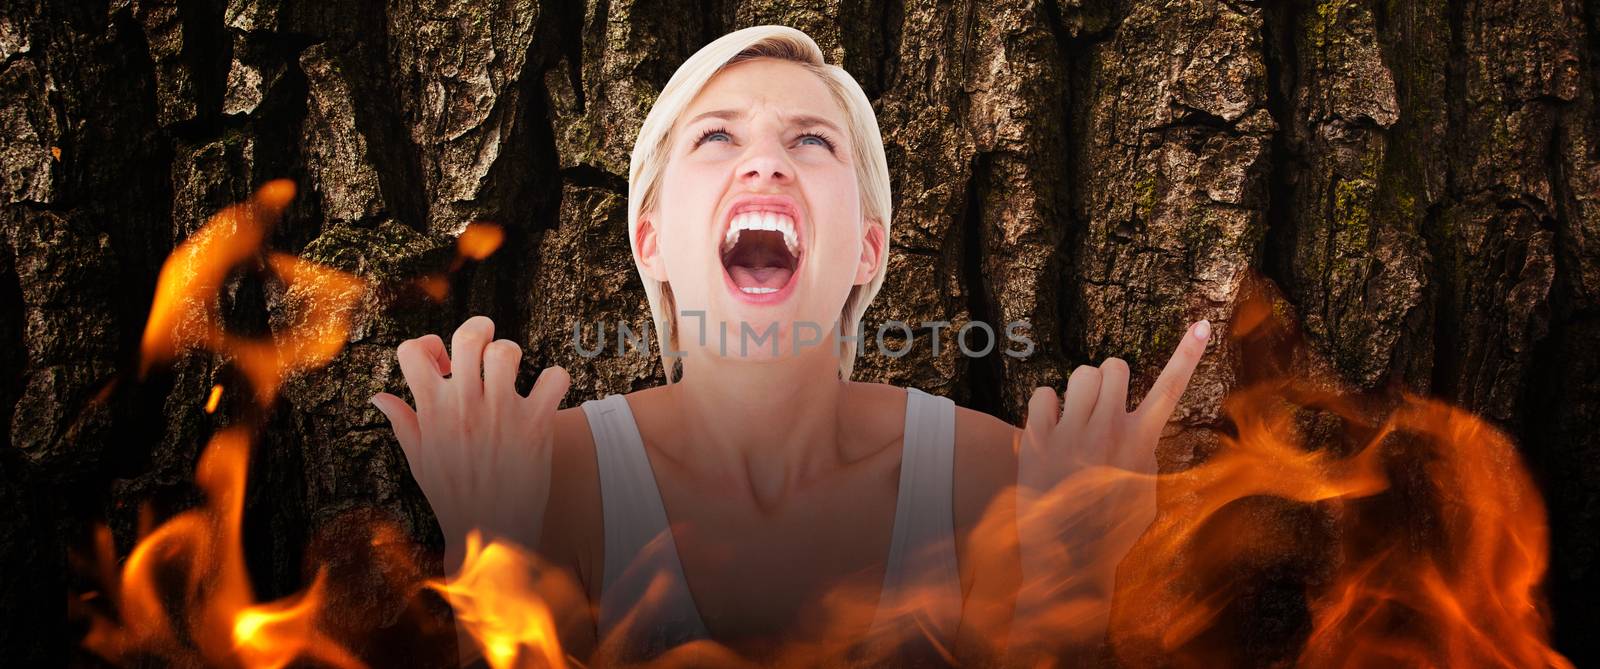 Upset woman screaming with hands up  against brown rough bark